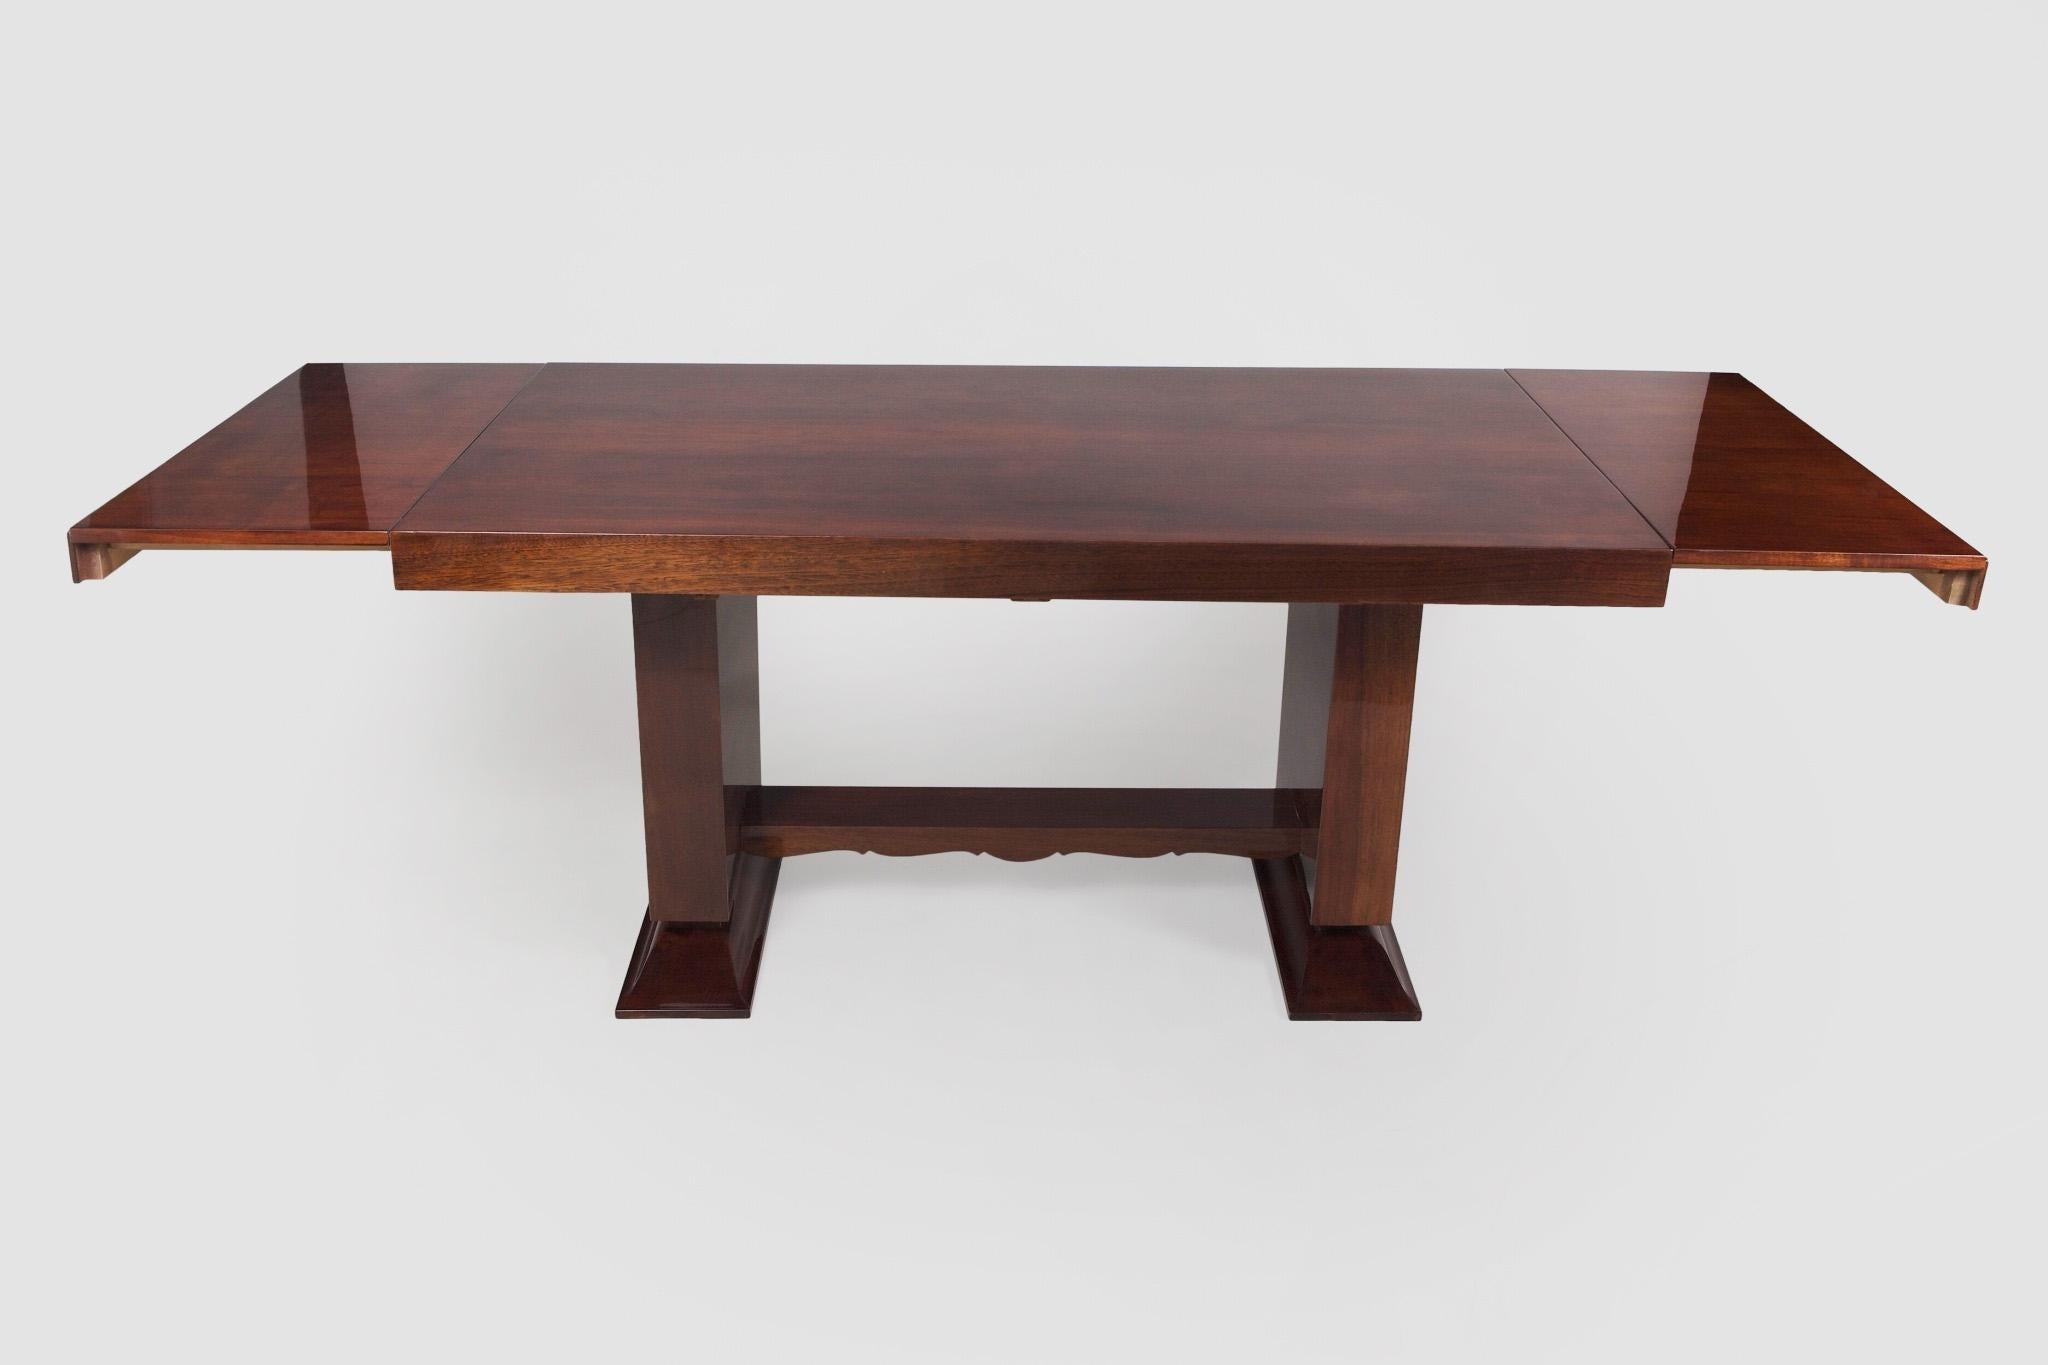 Early 20th Century Art Deco Extendable Dining Table, Made in 1920s France, Restored Mahogany